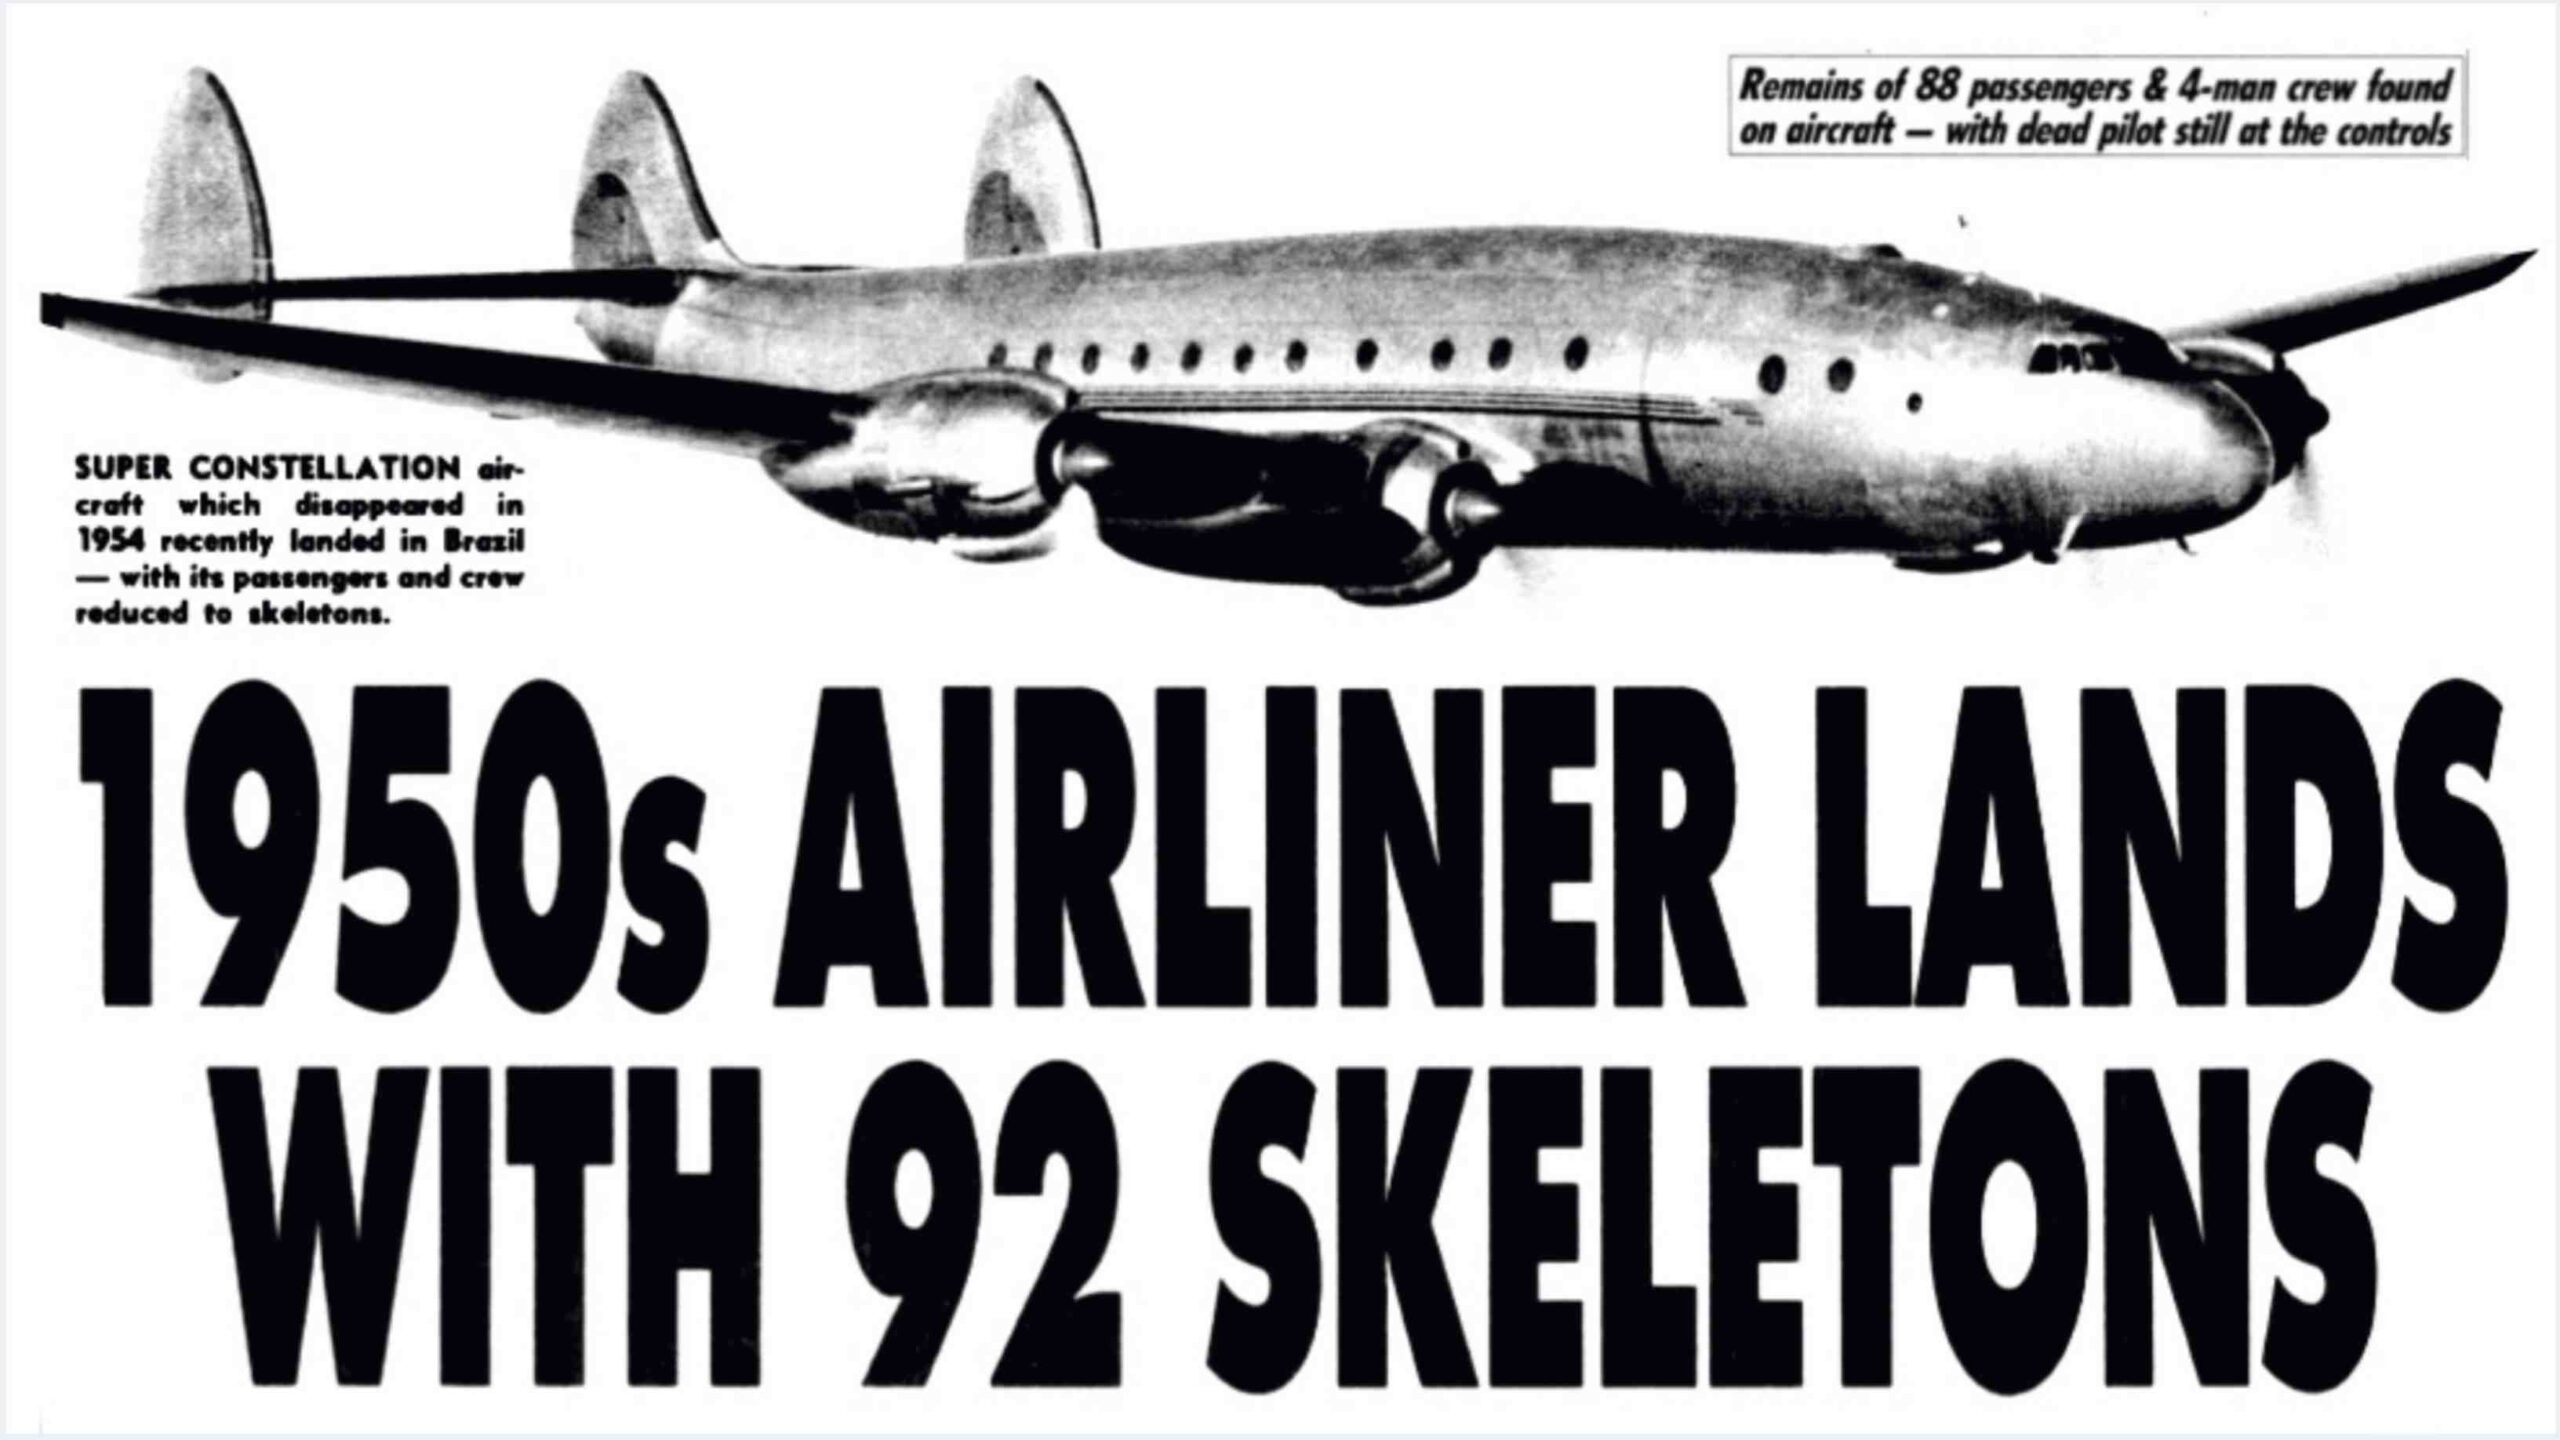 Santiago flight 513: The missing plane that landed after 35 years with 92 skeletons on board! 2